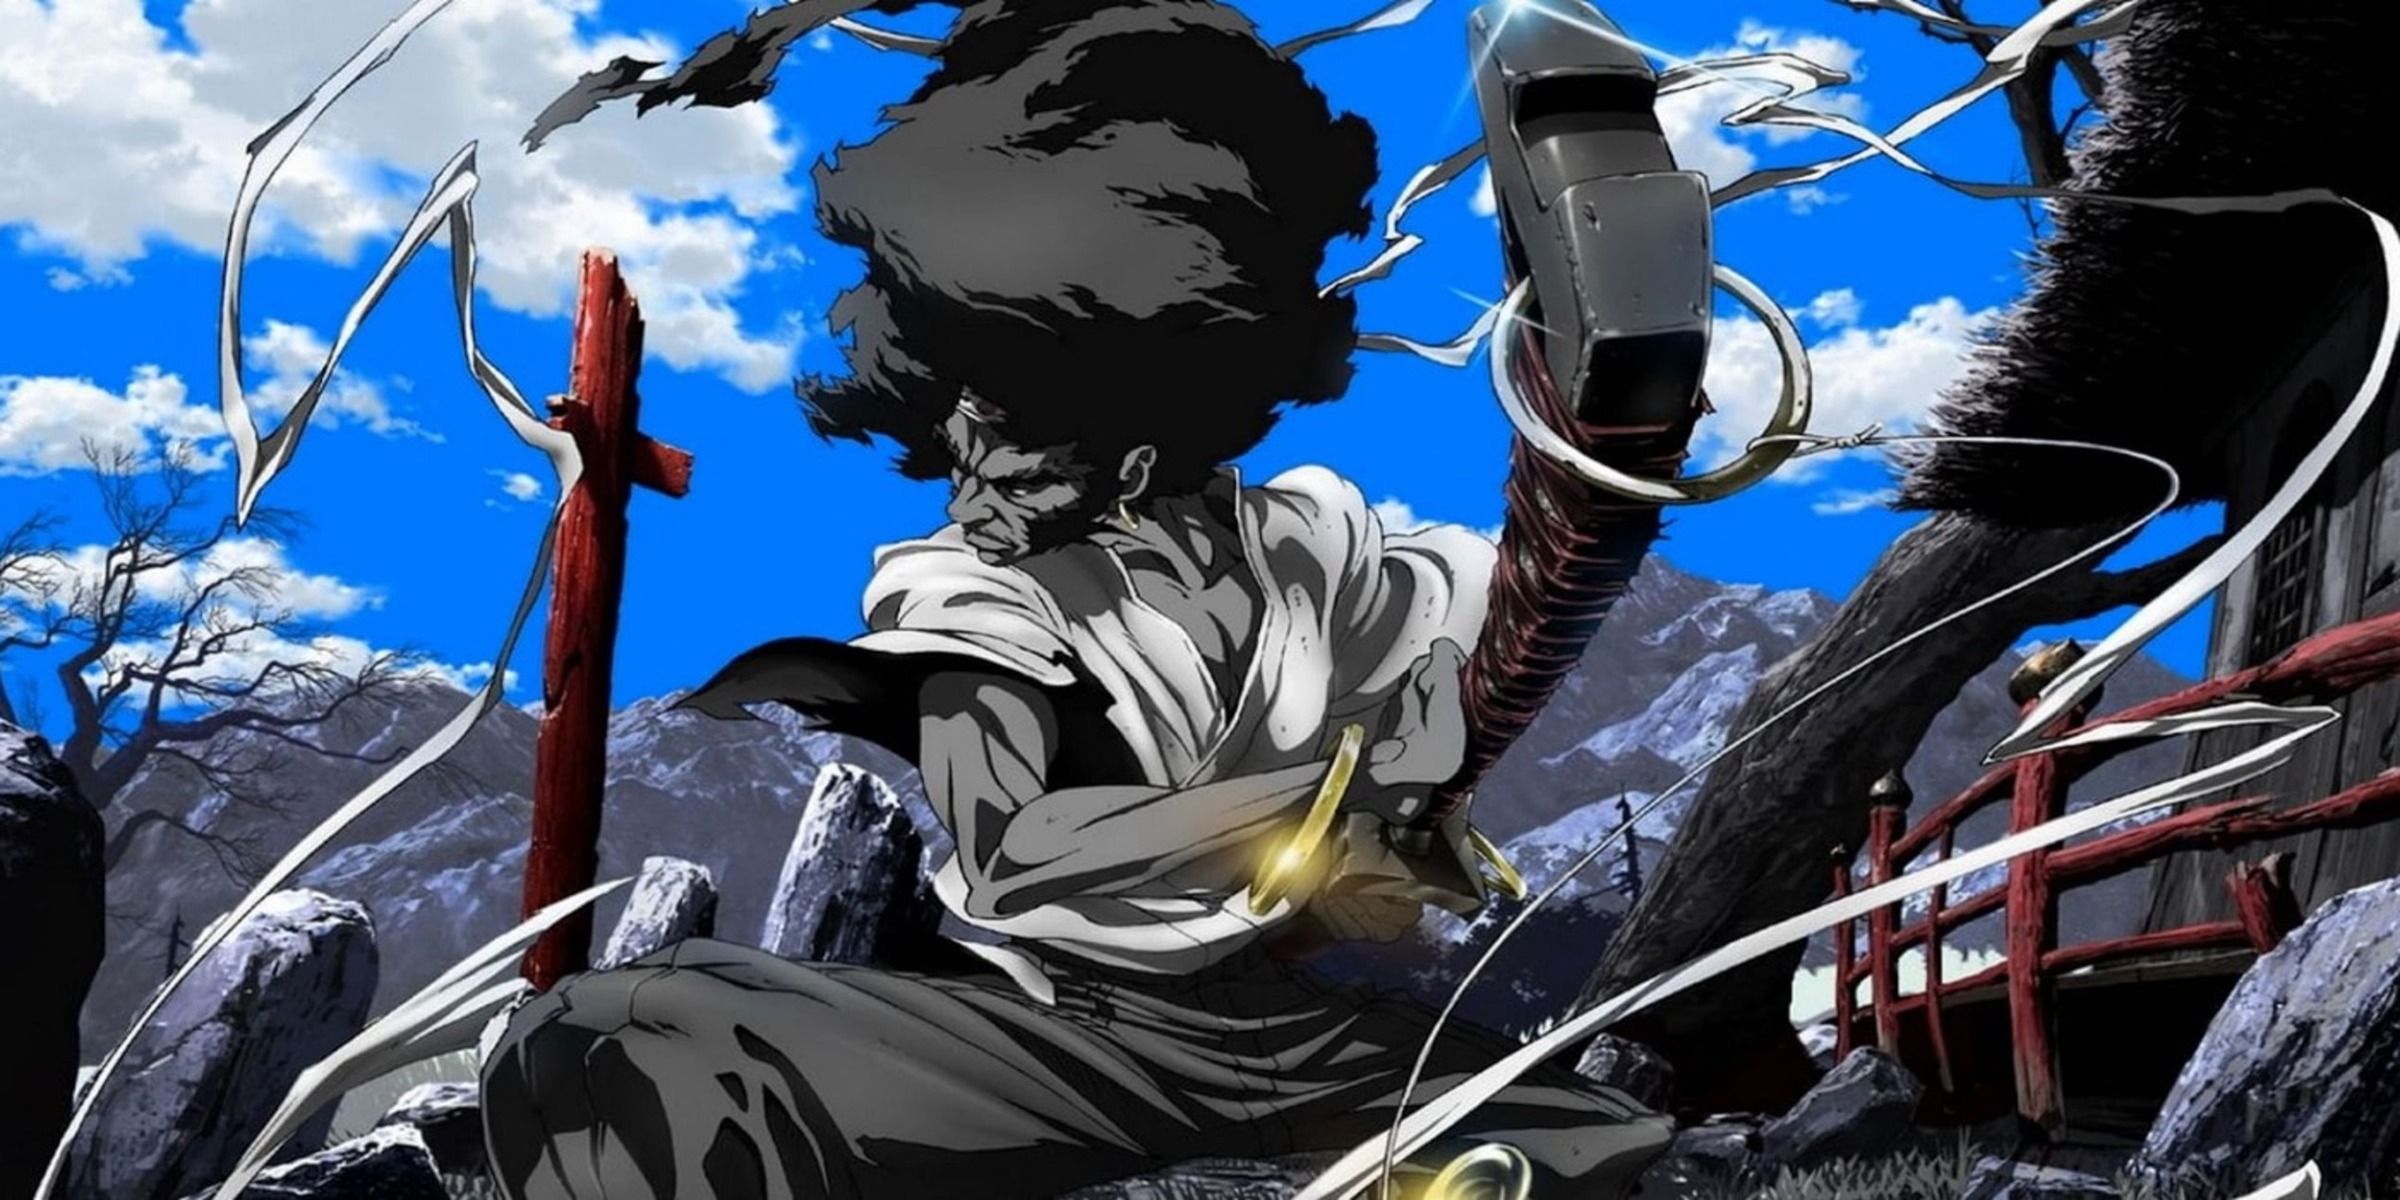 Afro Samurai drawing his sword by the temple screenshot